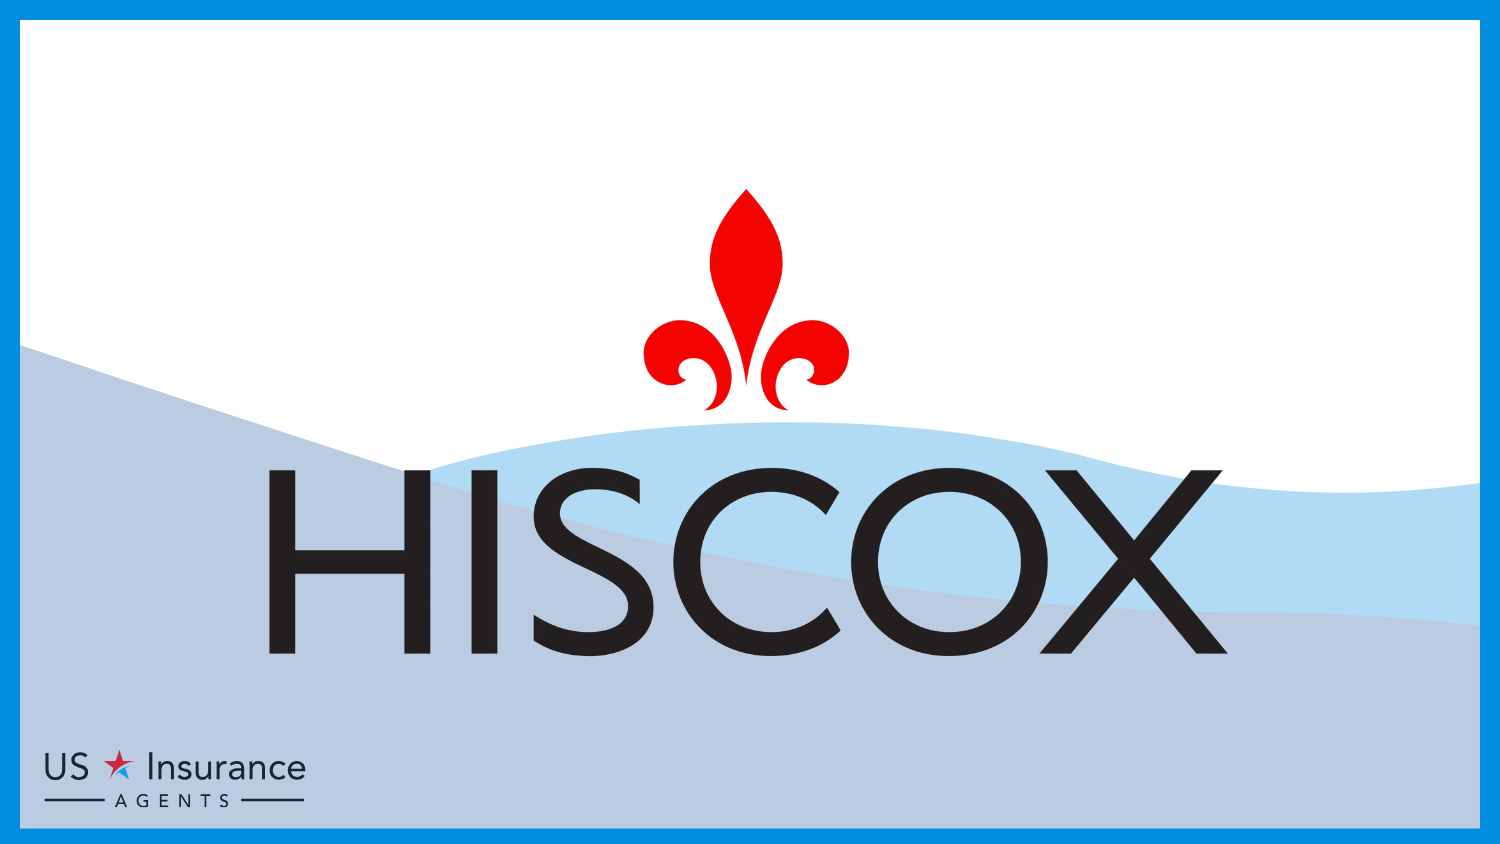 Hiscox: Best Business Insurance for Party Bus Rentals